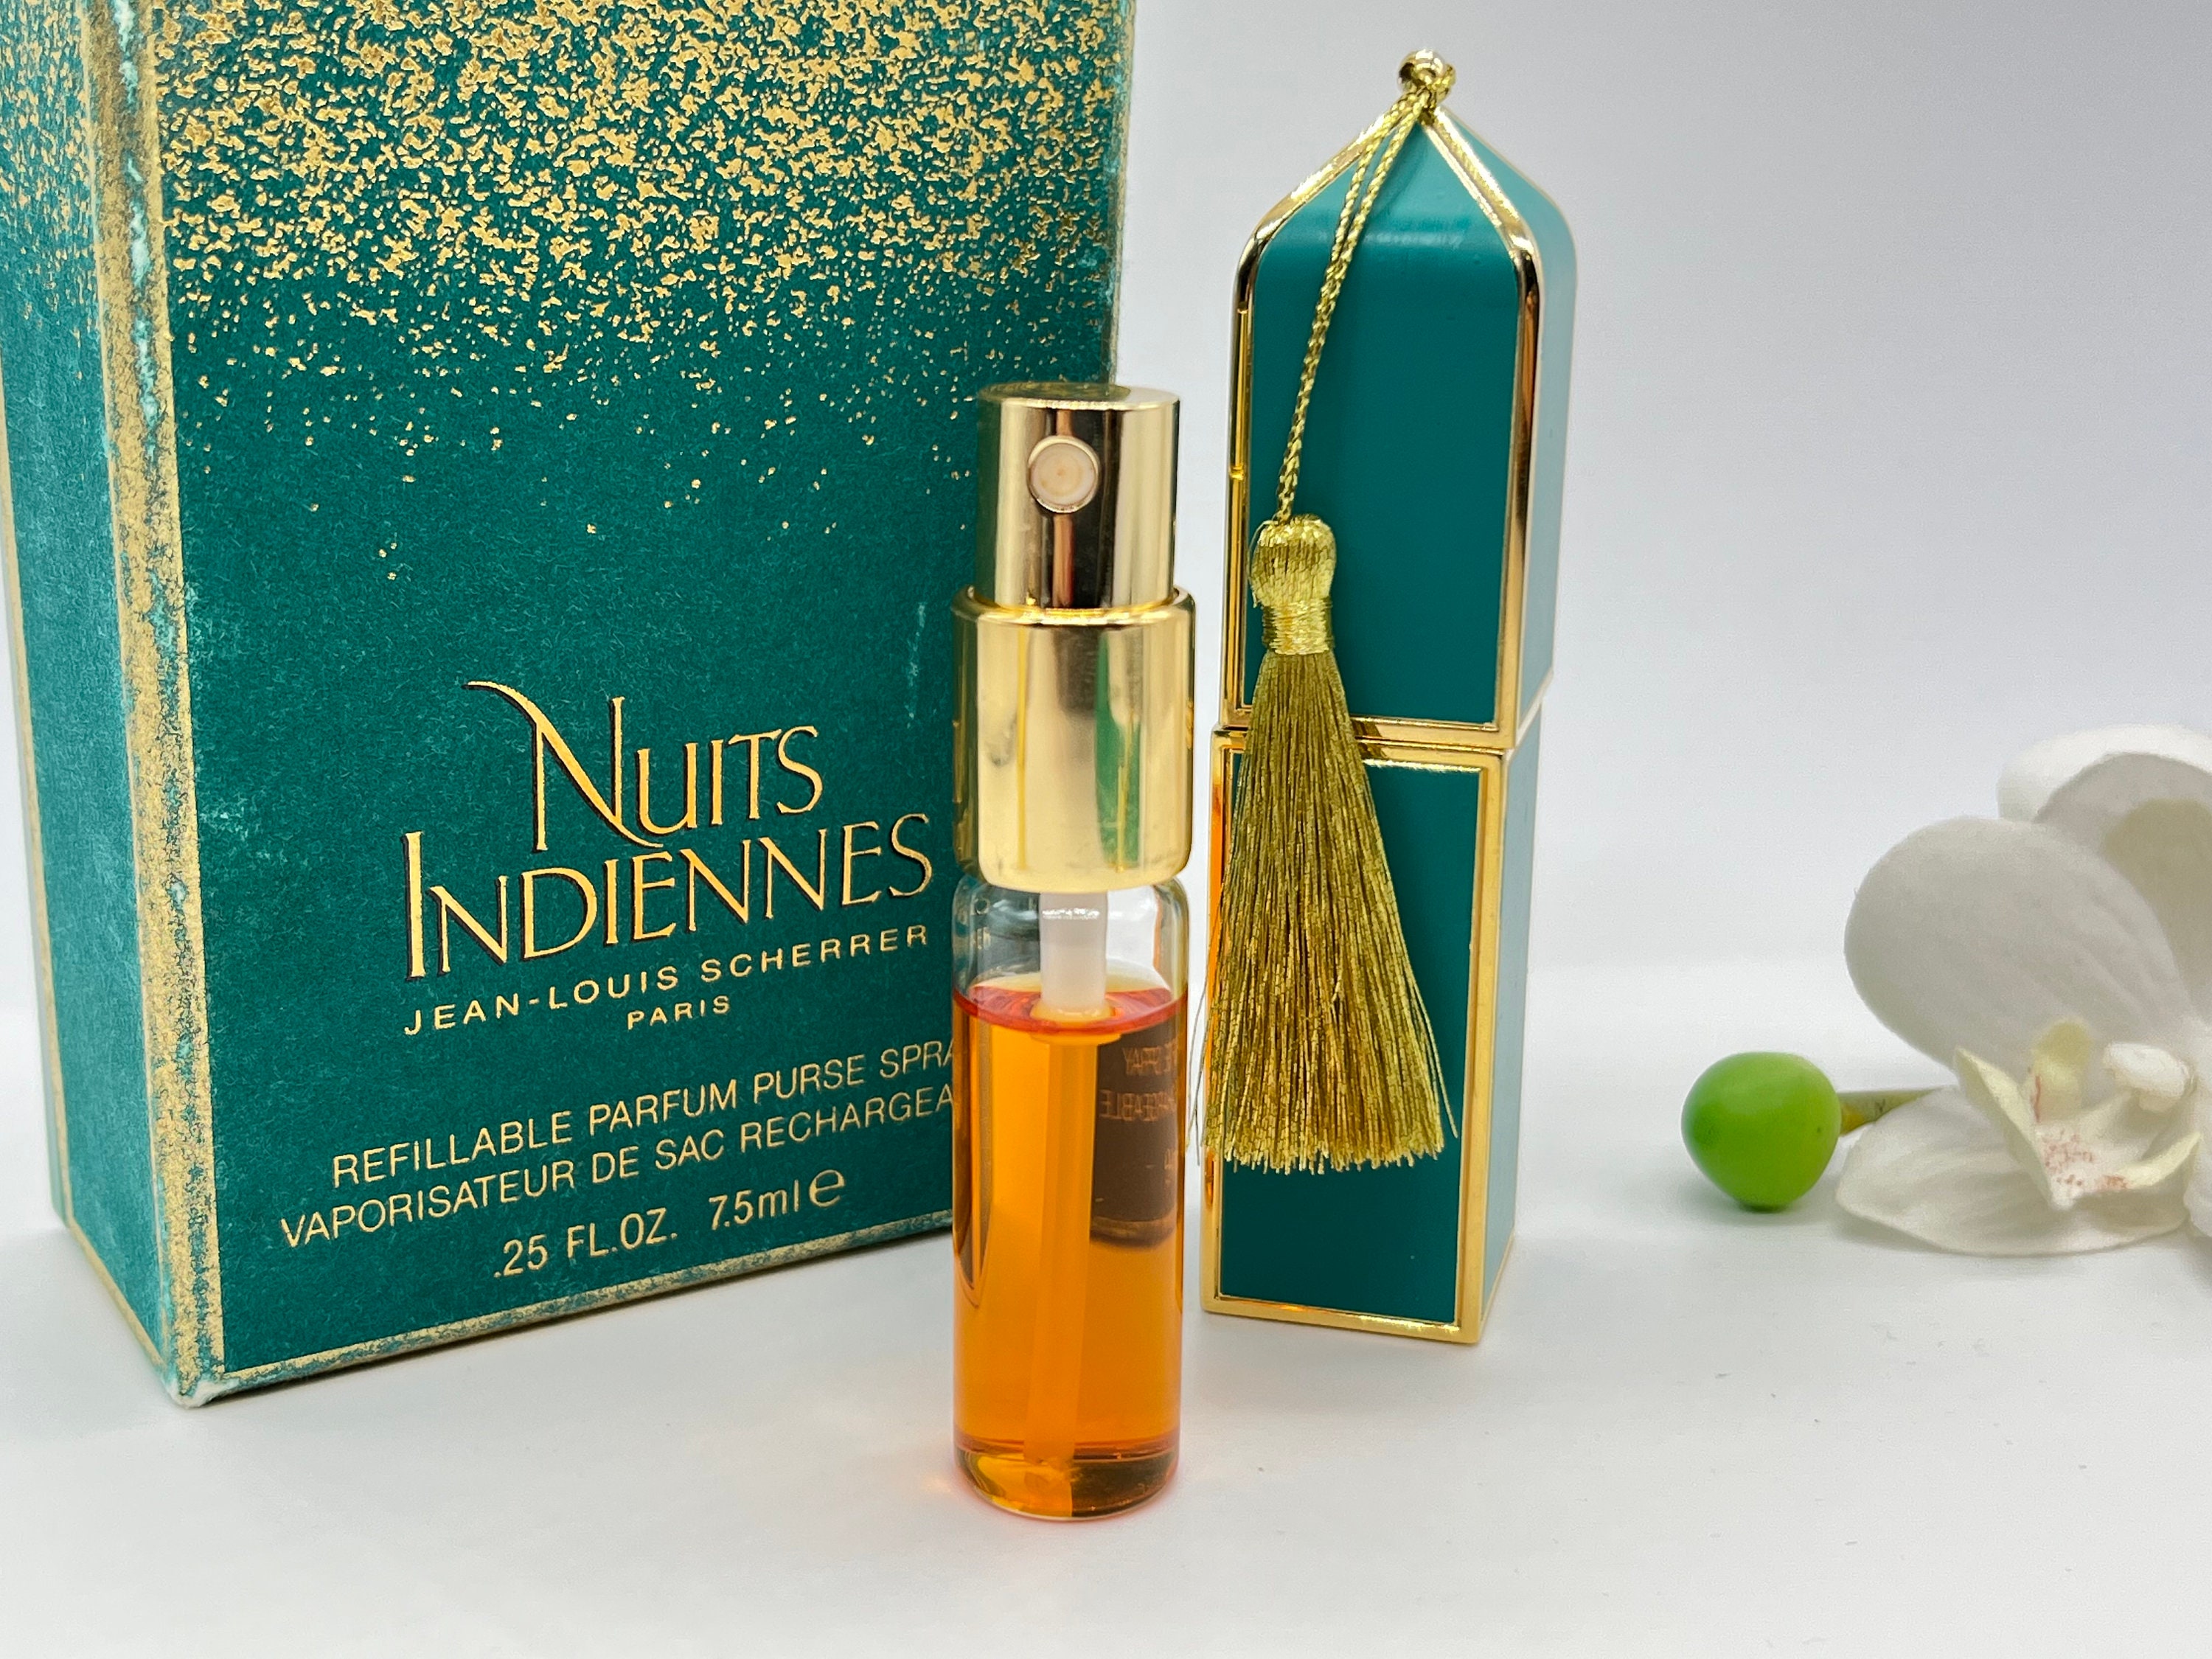 Nuits Indiennes (Indian Nights) Jean-Louis Scherrer perfume - a fragrance  for women 1994